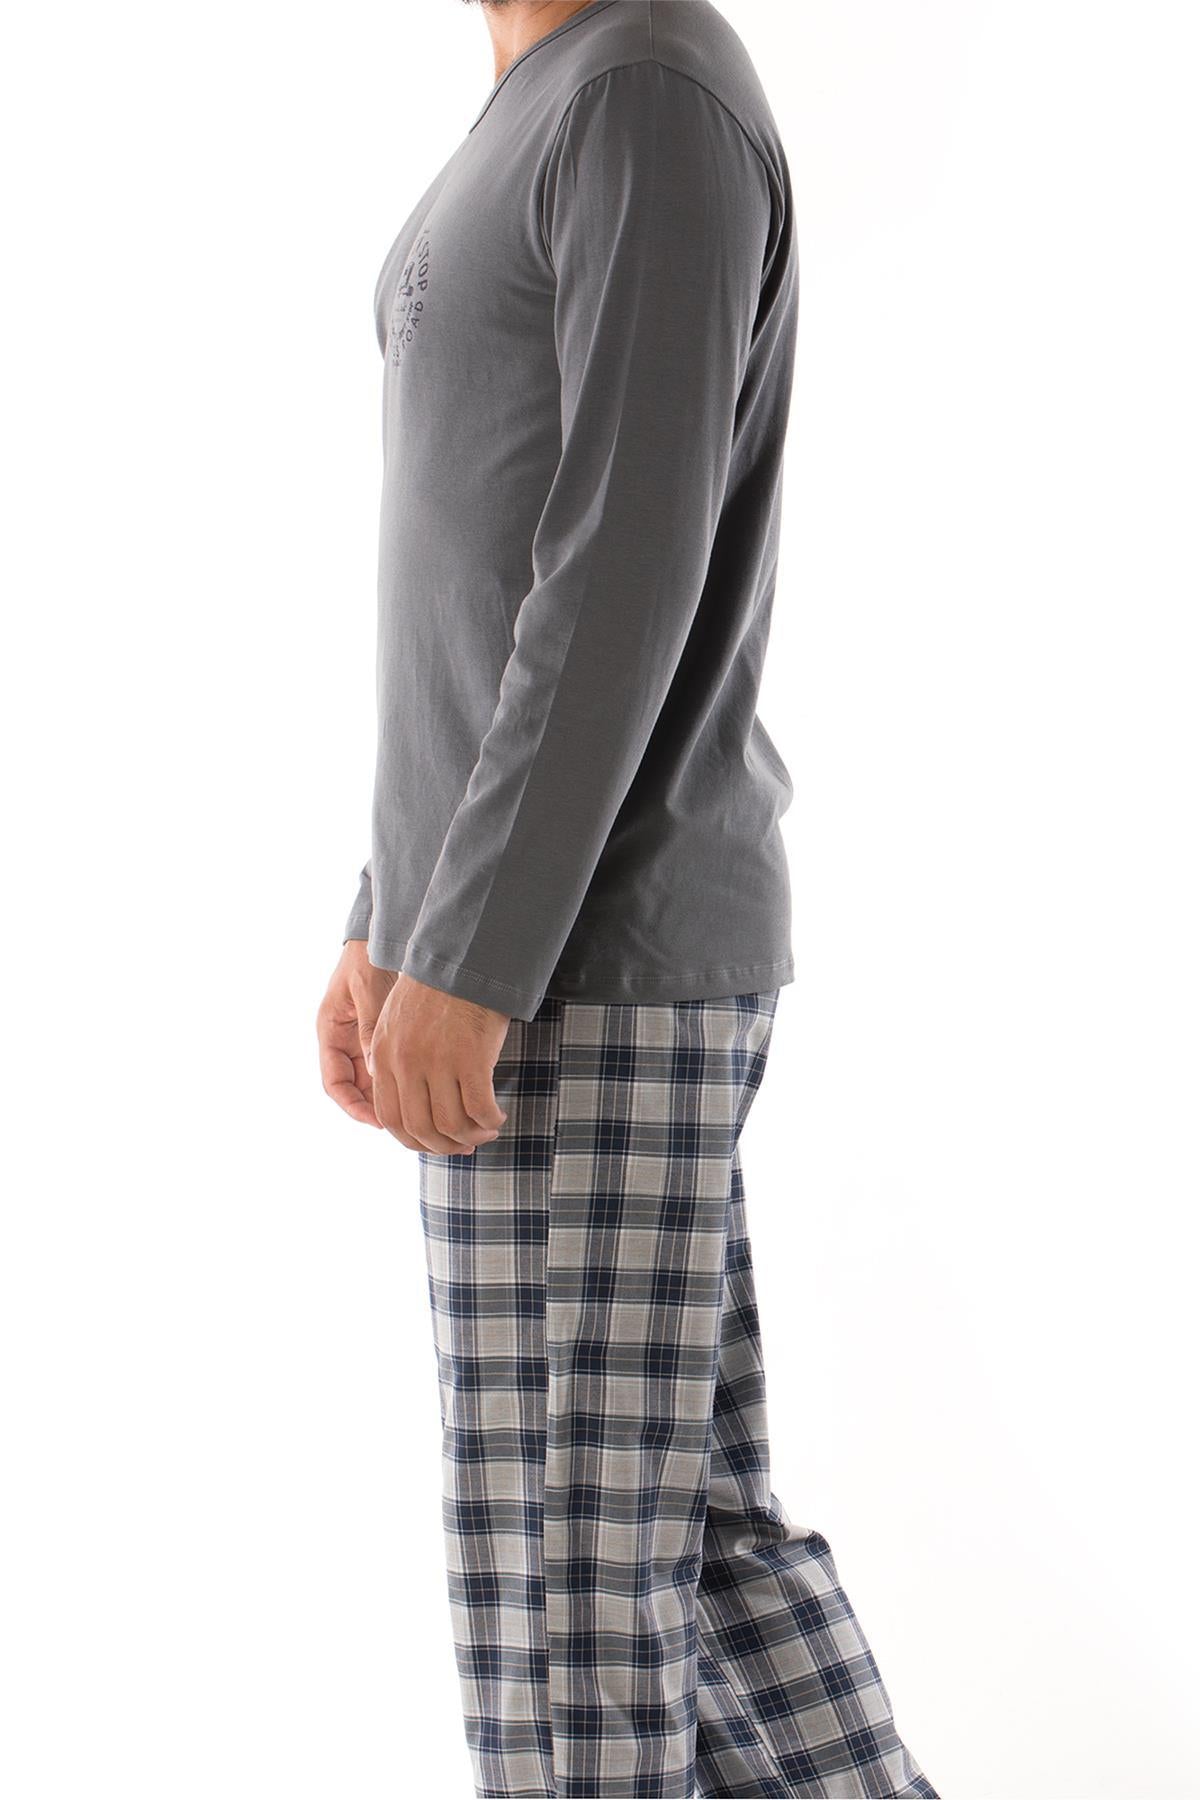 Casual Long-sleeved Men's Cotton Pajamas Suit